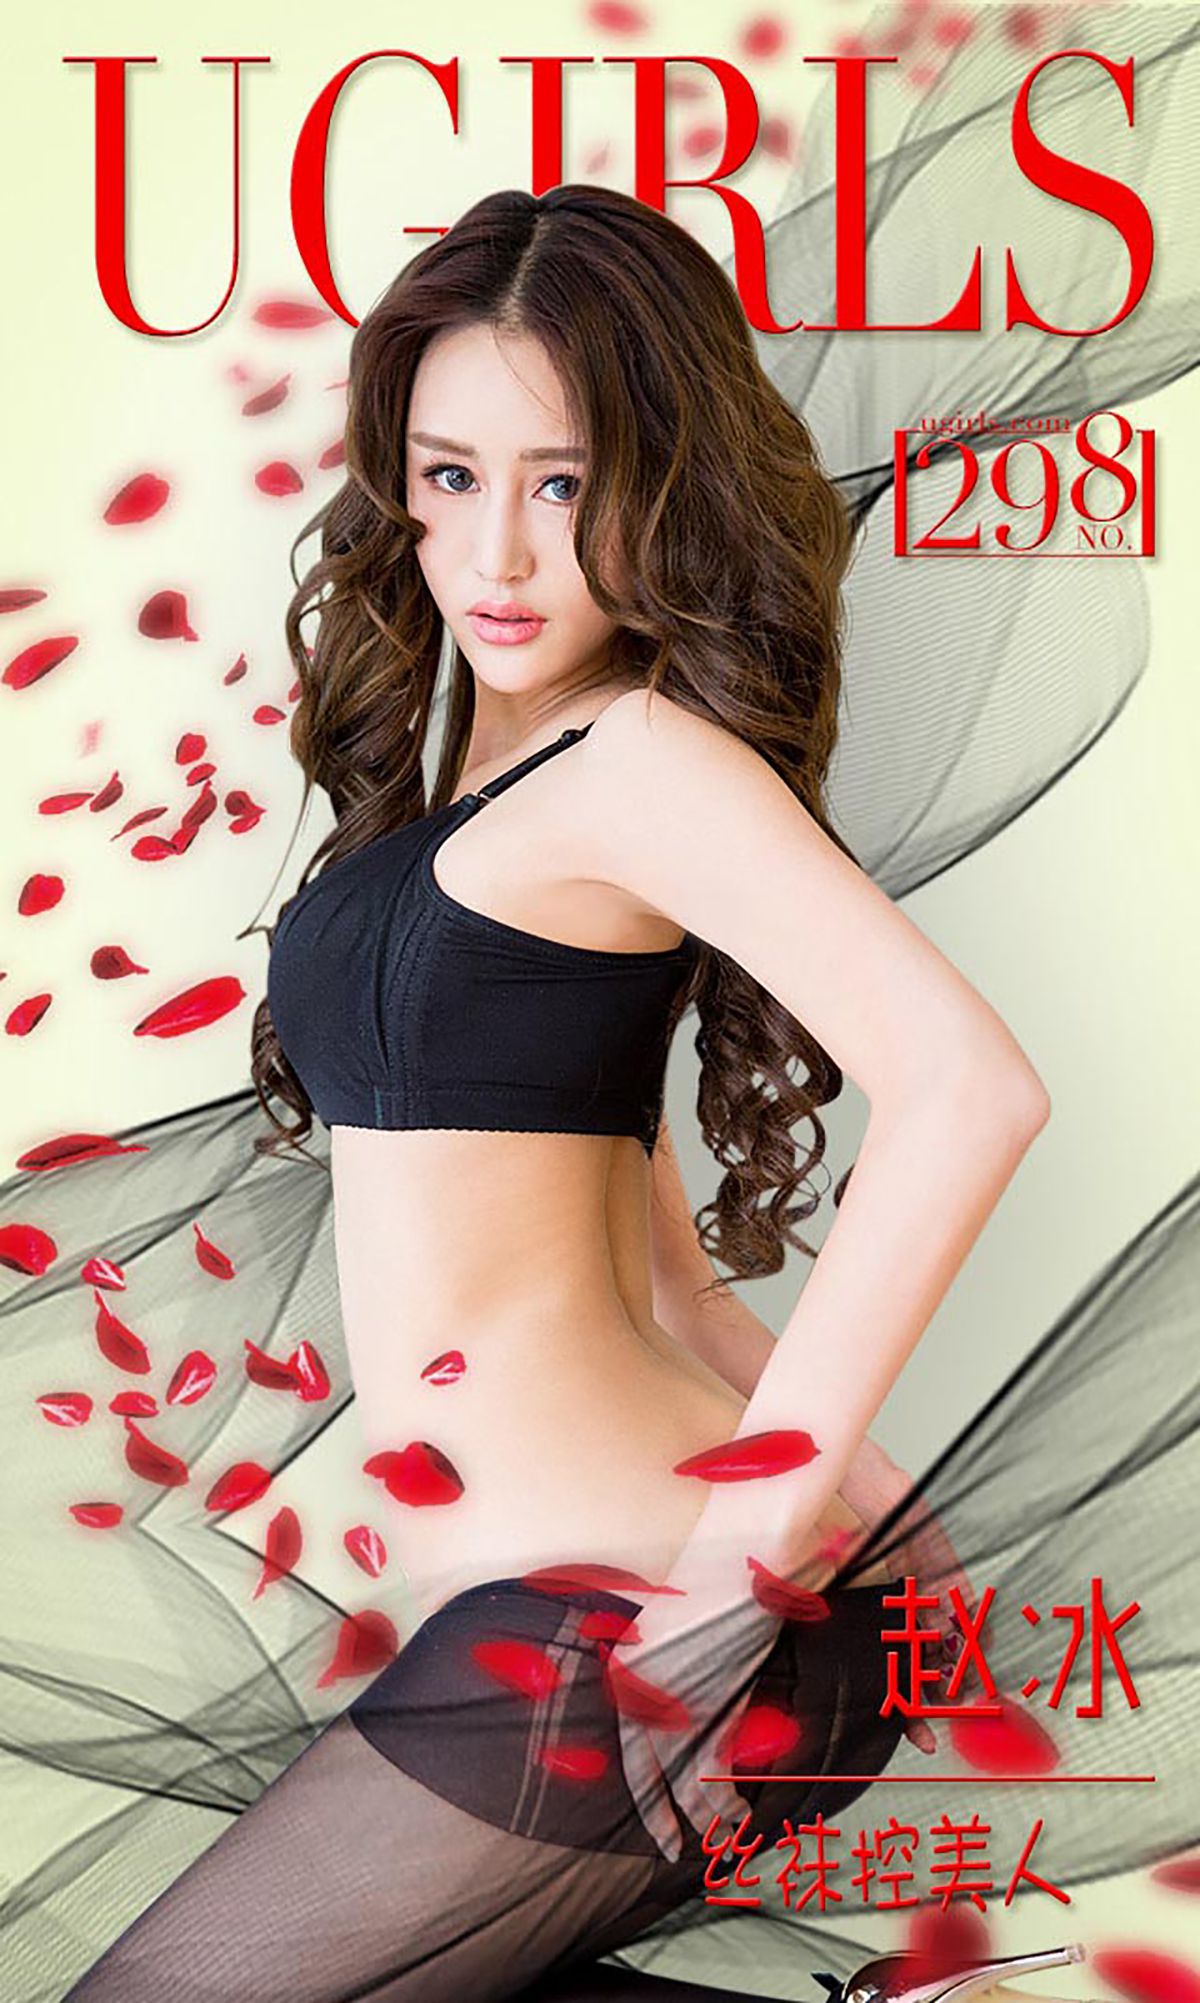 Zhao Bing "Controlling Beauty in Stockings" [Love Ugirls] No.298 Page 15 No.ae3598